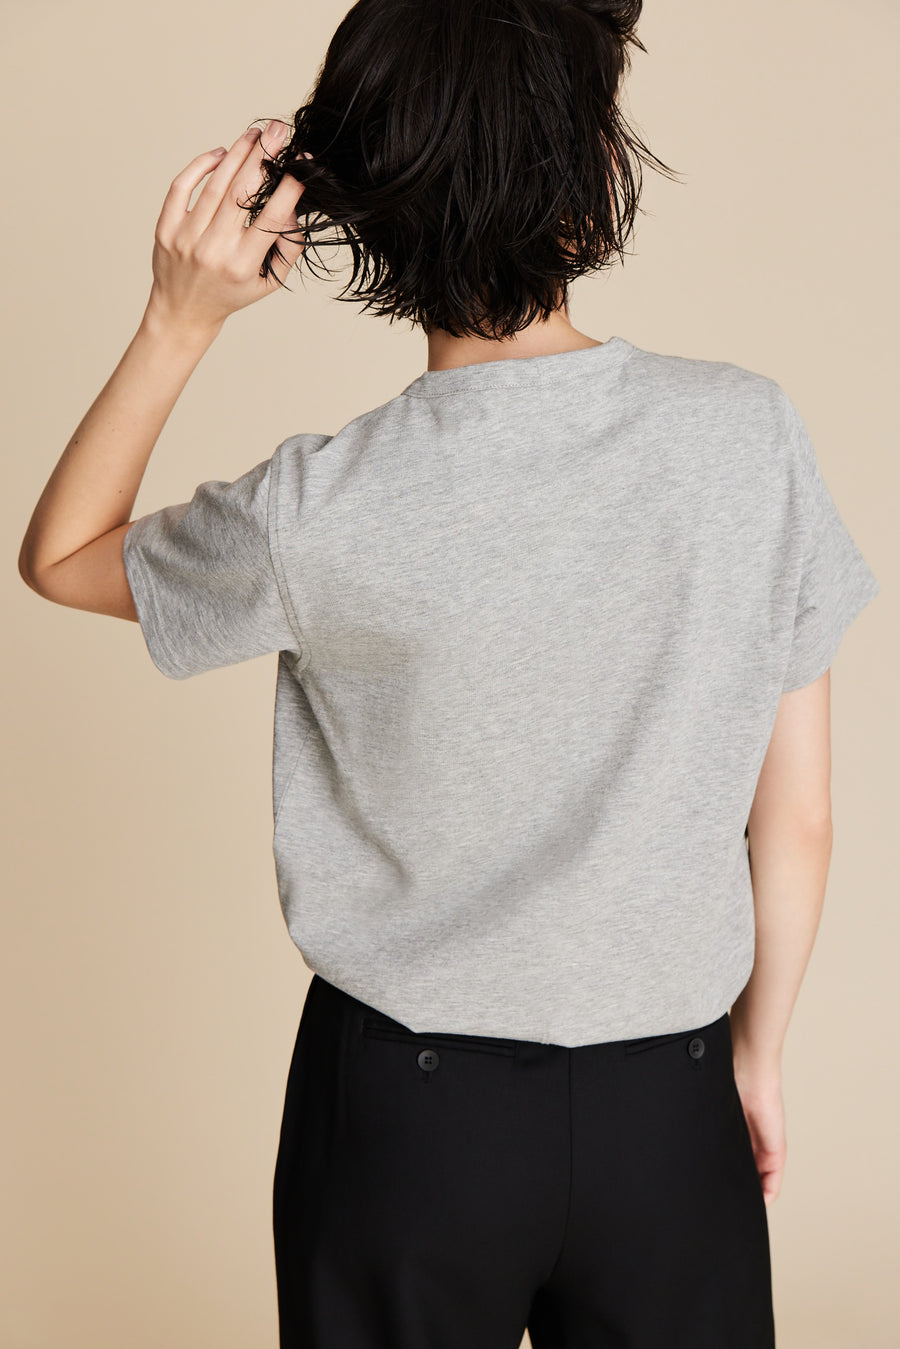 The Iconically Soft Sold Out Tee in Heather NYC Perfect – Grey